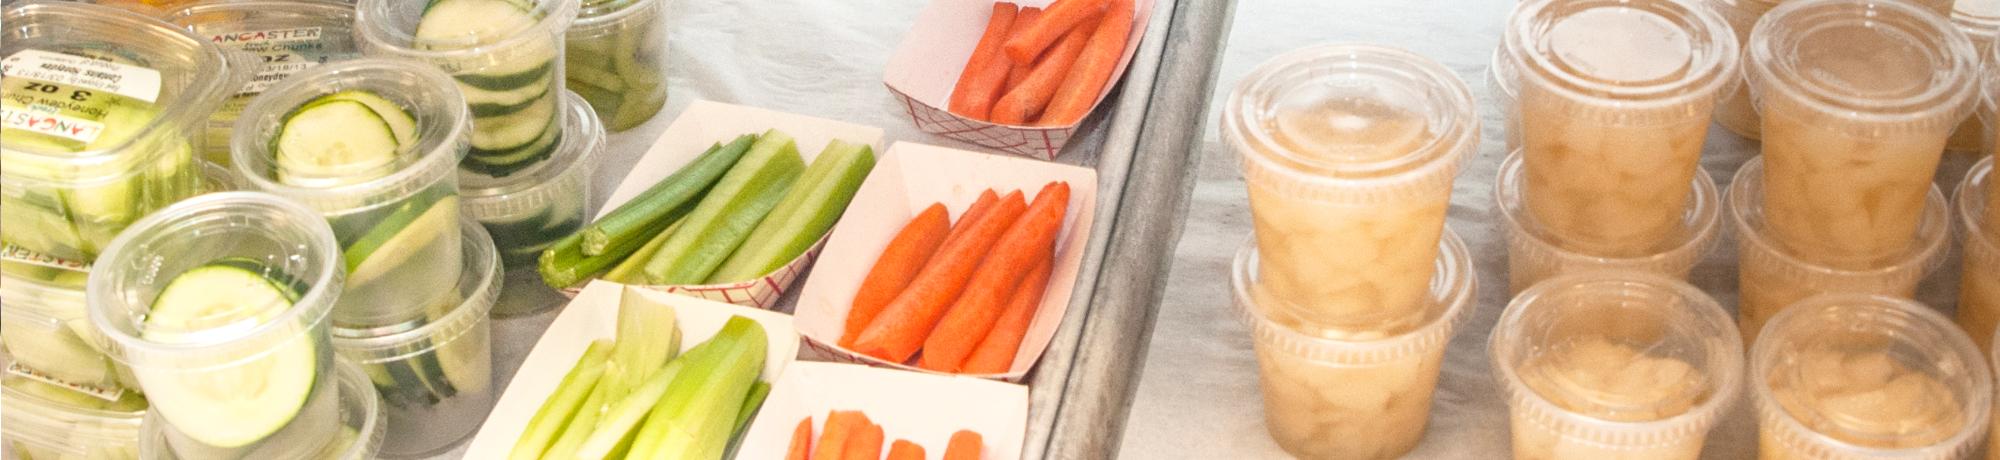 School lunch options, portions of cucumber, celery, carrots, and apple sauce